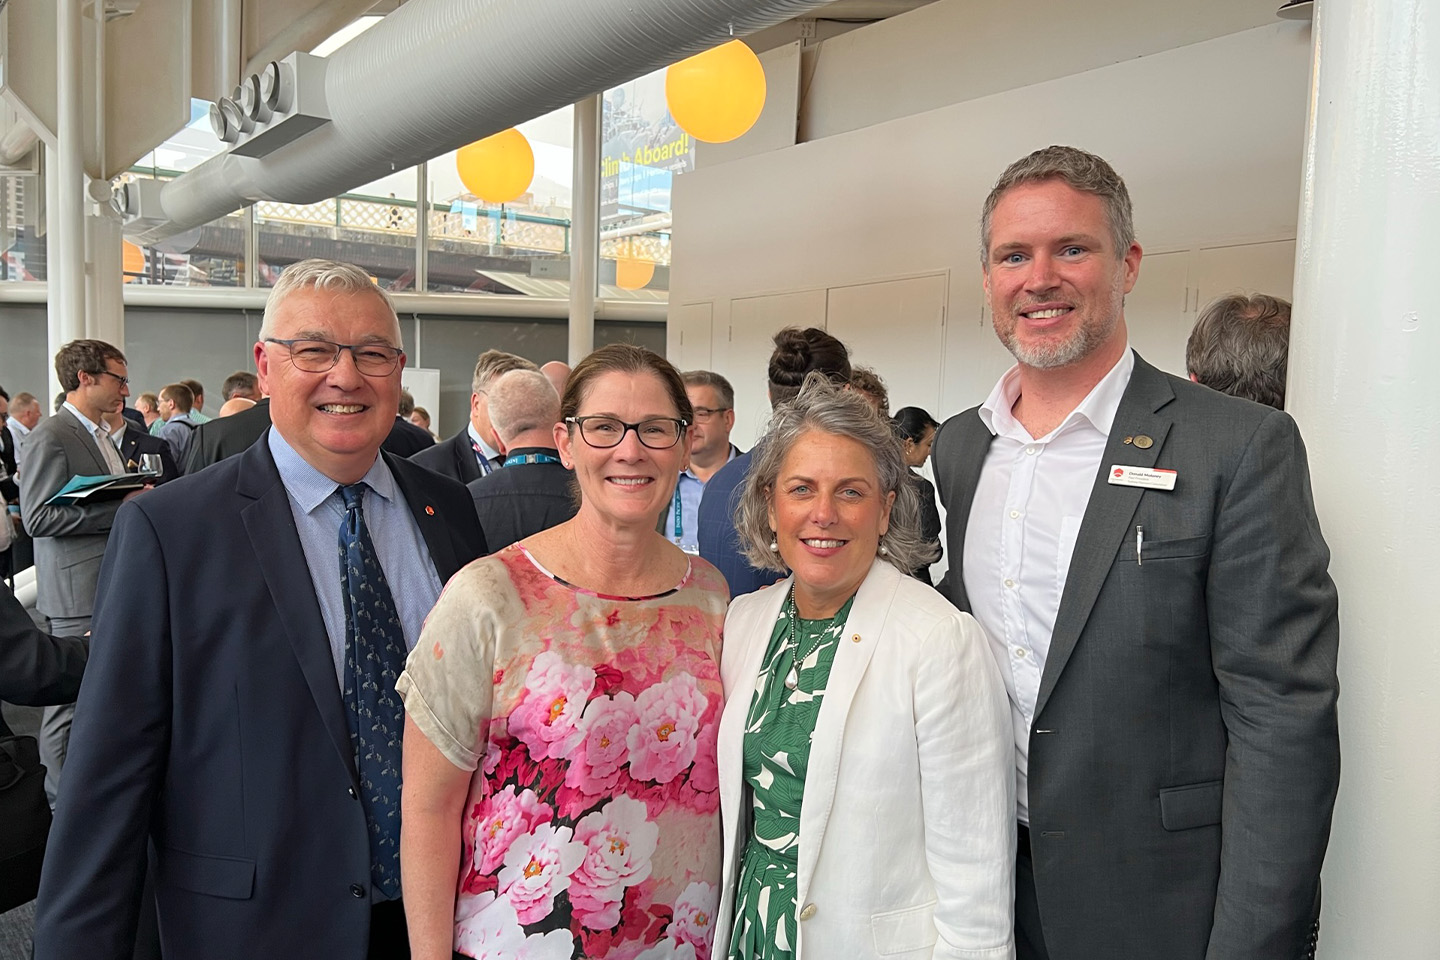 Image: (From L to R) Bruce Howard, HonFIEAust CPEng NER, Head Navy Engineering Rachel Durbin MIEAust CPEng NER, Romilly Madew AO and past NSW President Don Moloney FIEAust CPEng NER. 